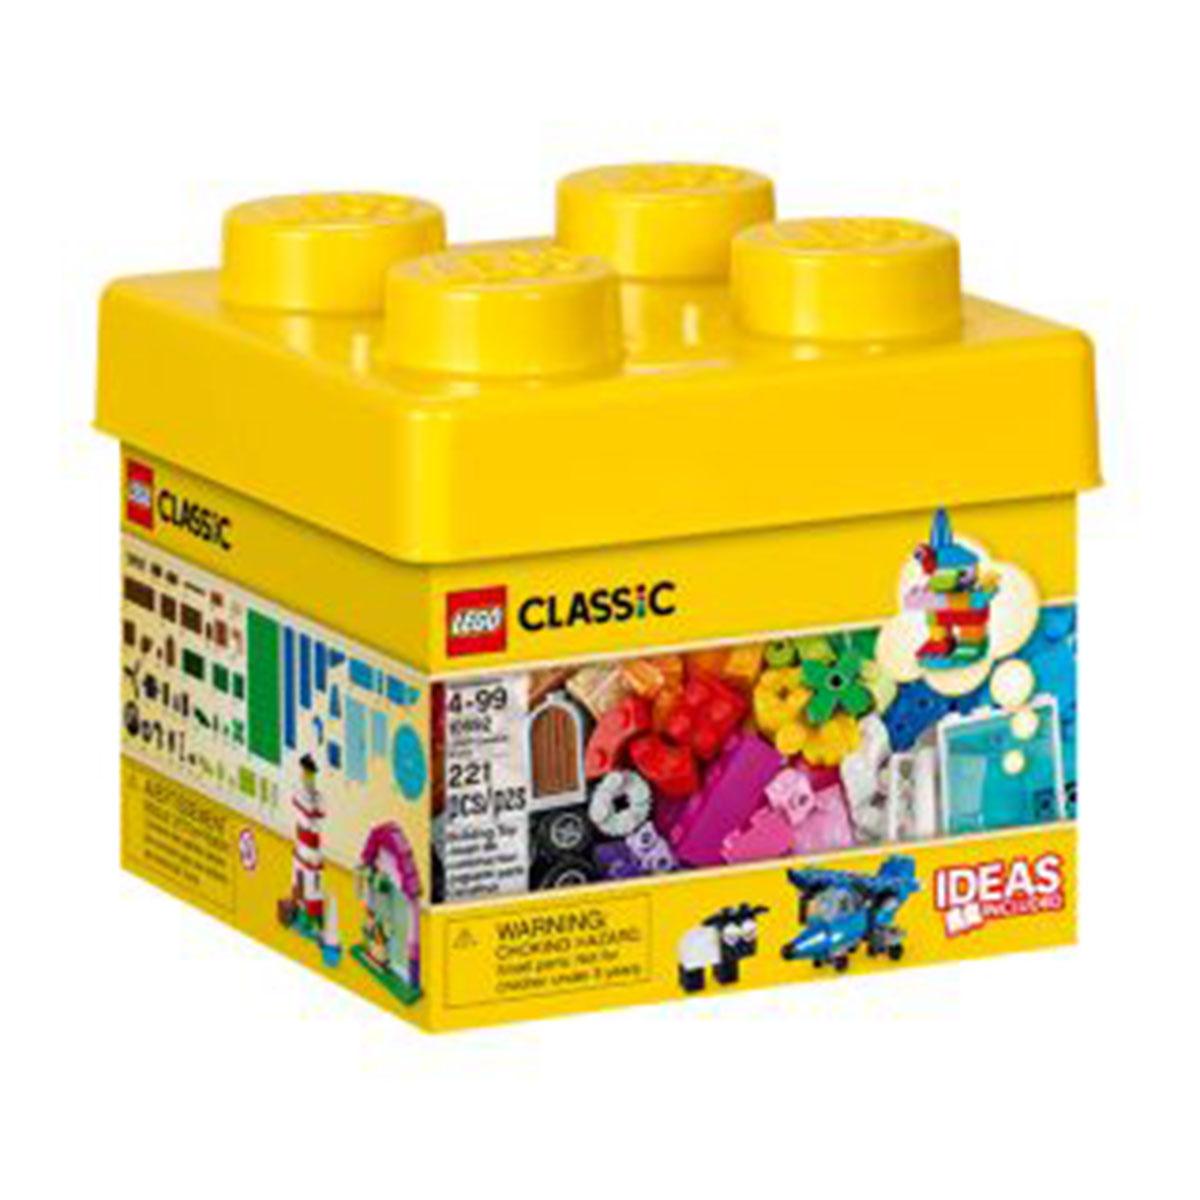 Lego Classic Toy For Kids: Buy Online 